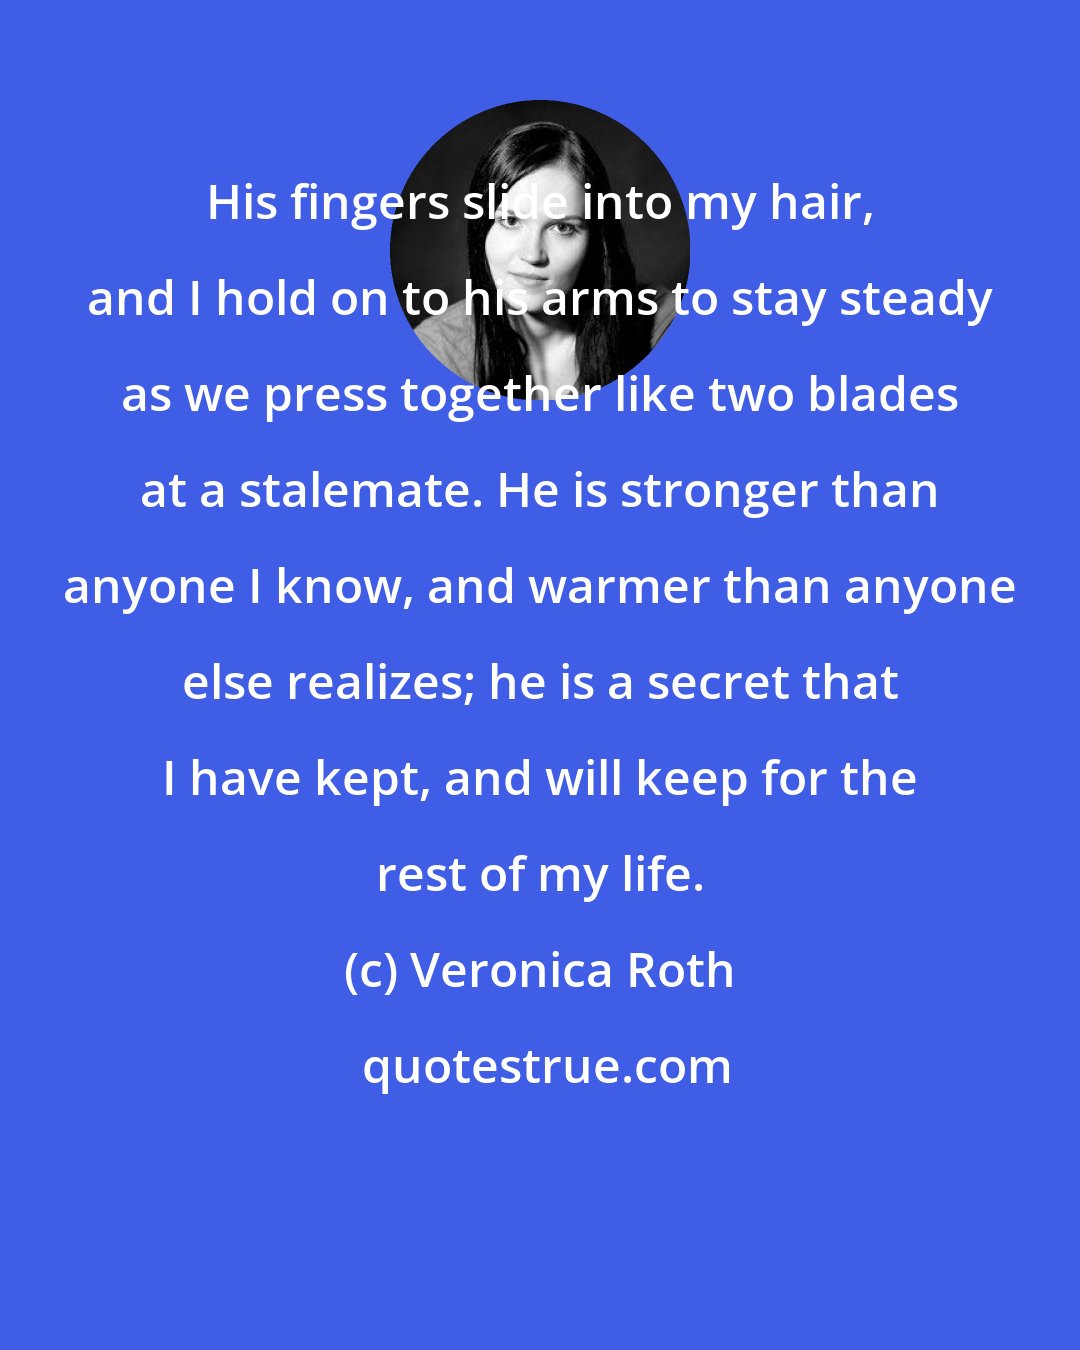 Veronica Roth: His fingers slide into my hair, and I hold on to his arms to stay steady as we press together like two blades at a stalemate. He is stronger than anyone I know, and warmer than anyone else realizes; he is a secret that I have kept, and will keep for the rest of my life.